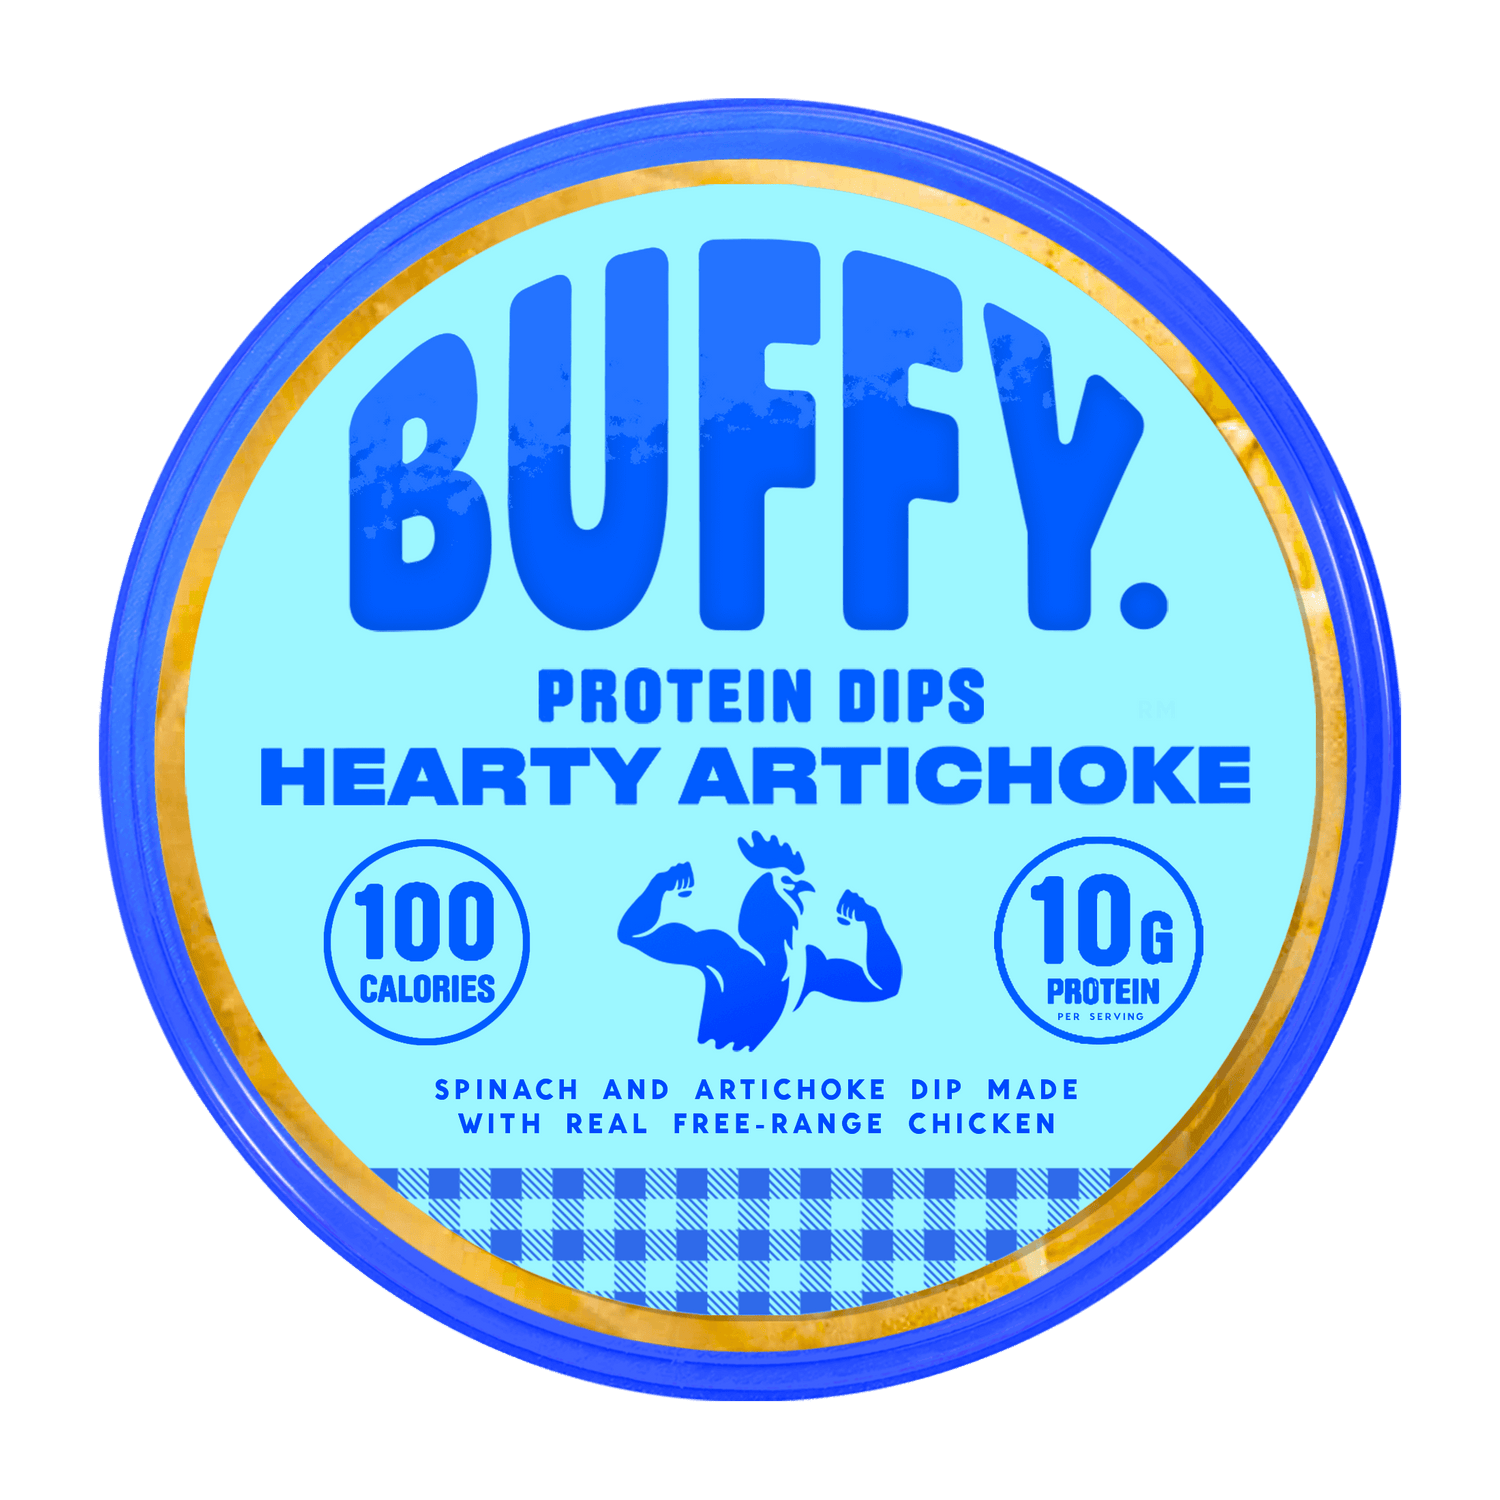 Buffy Protein Dips - Hearty Artichoke - 100 Calories - 10G Protein per serving - Spinach and artichoke dip made with real free-range chicken